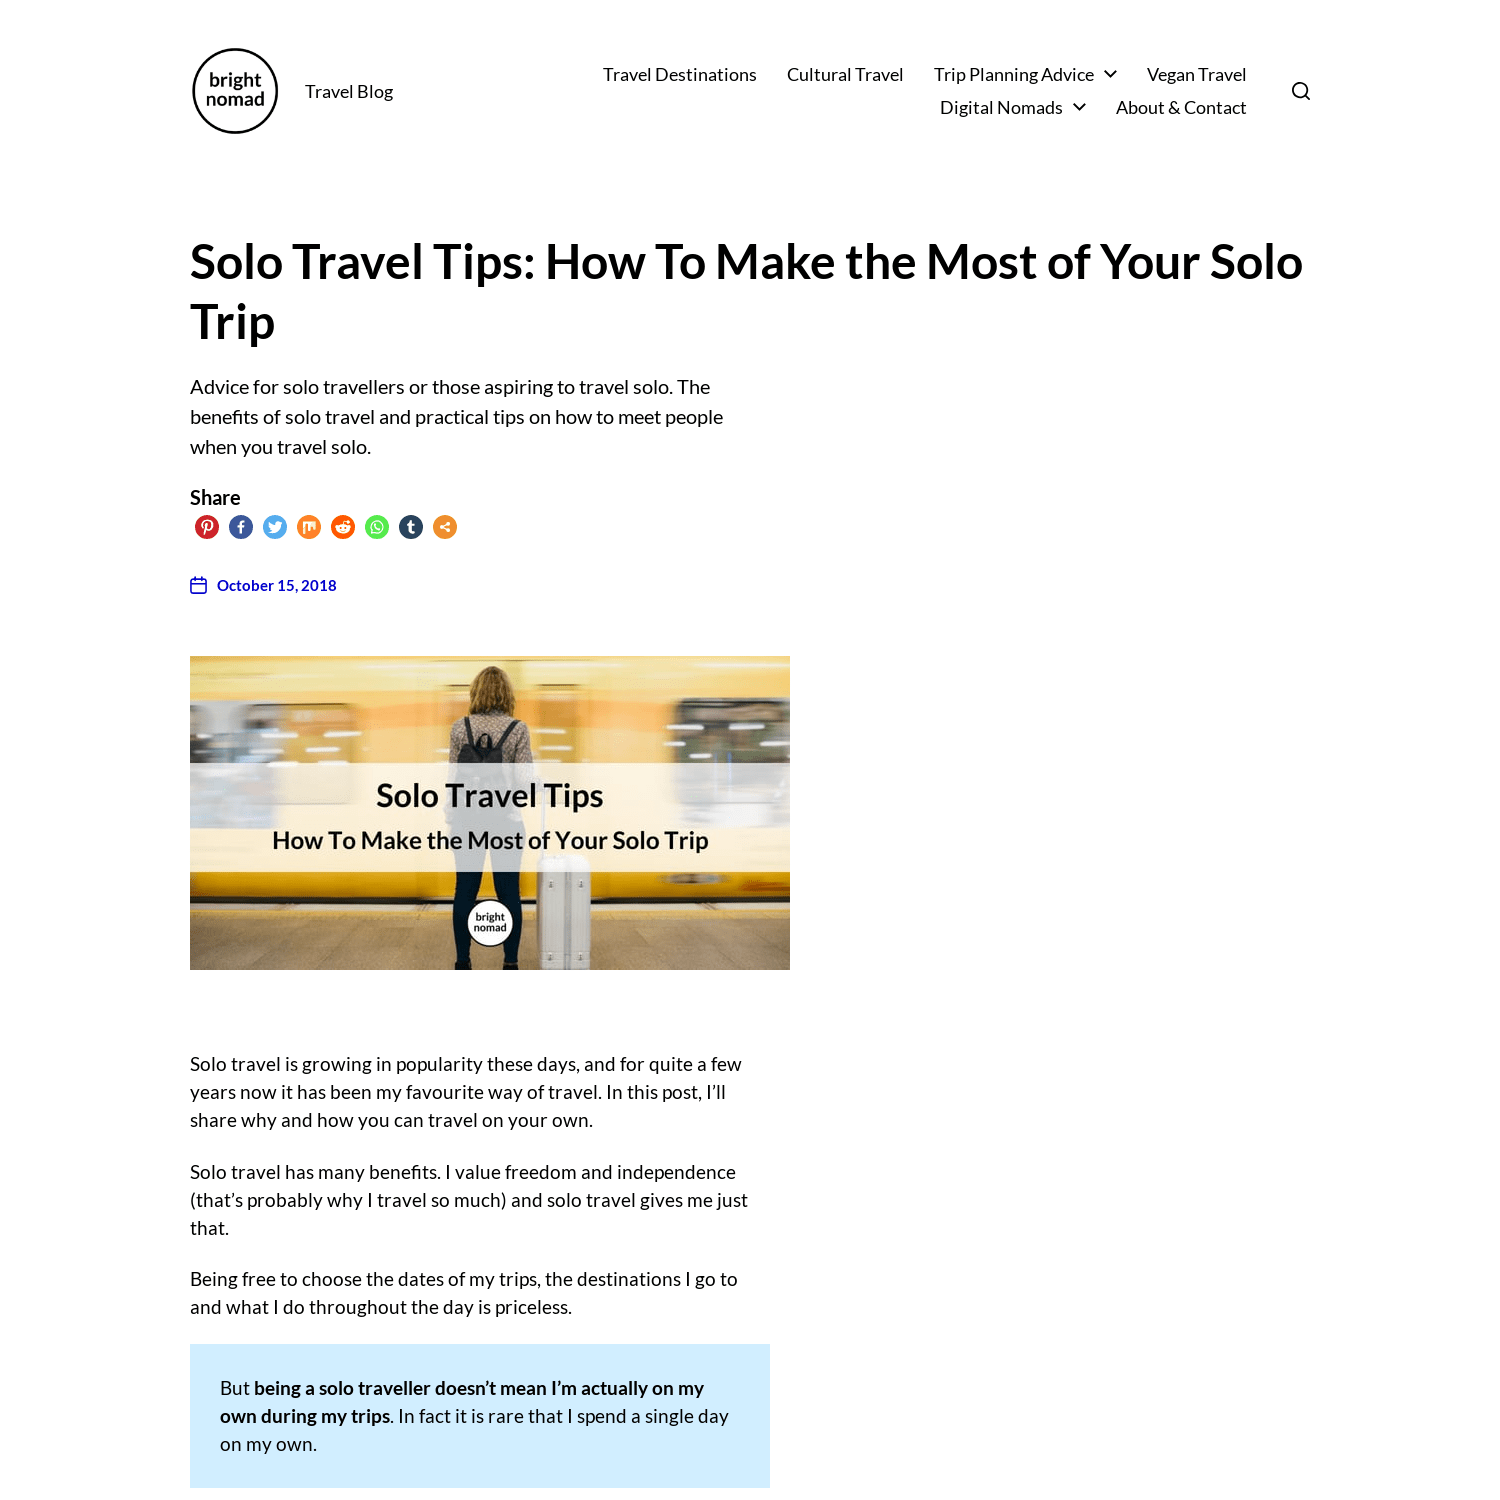 Solo Travel Tips: How To Make the Most of Your Solo Trip